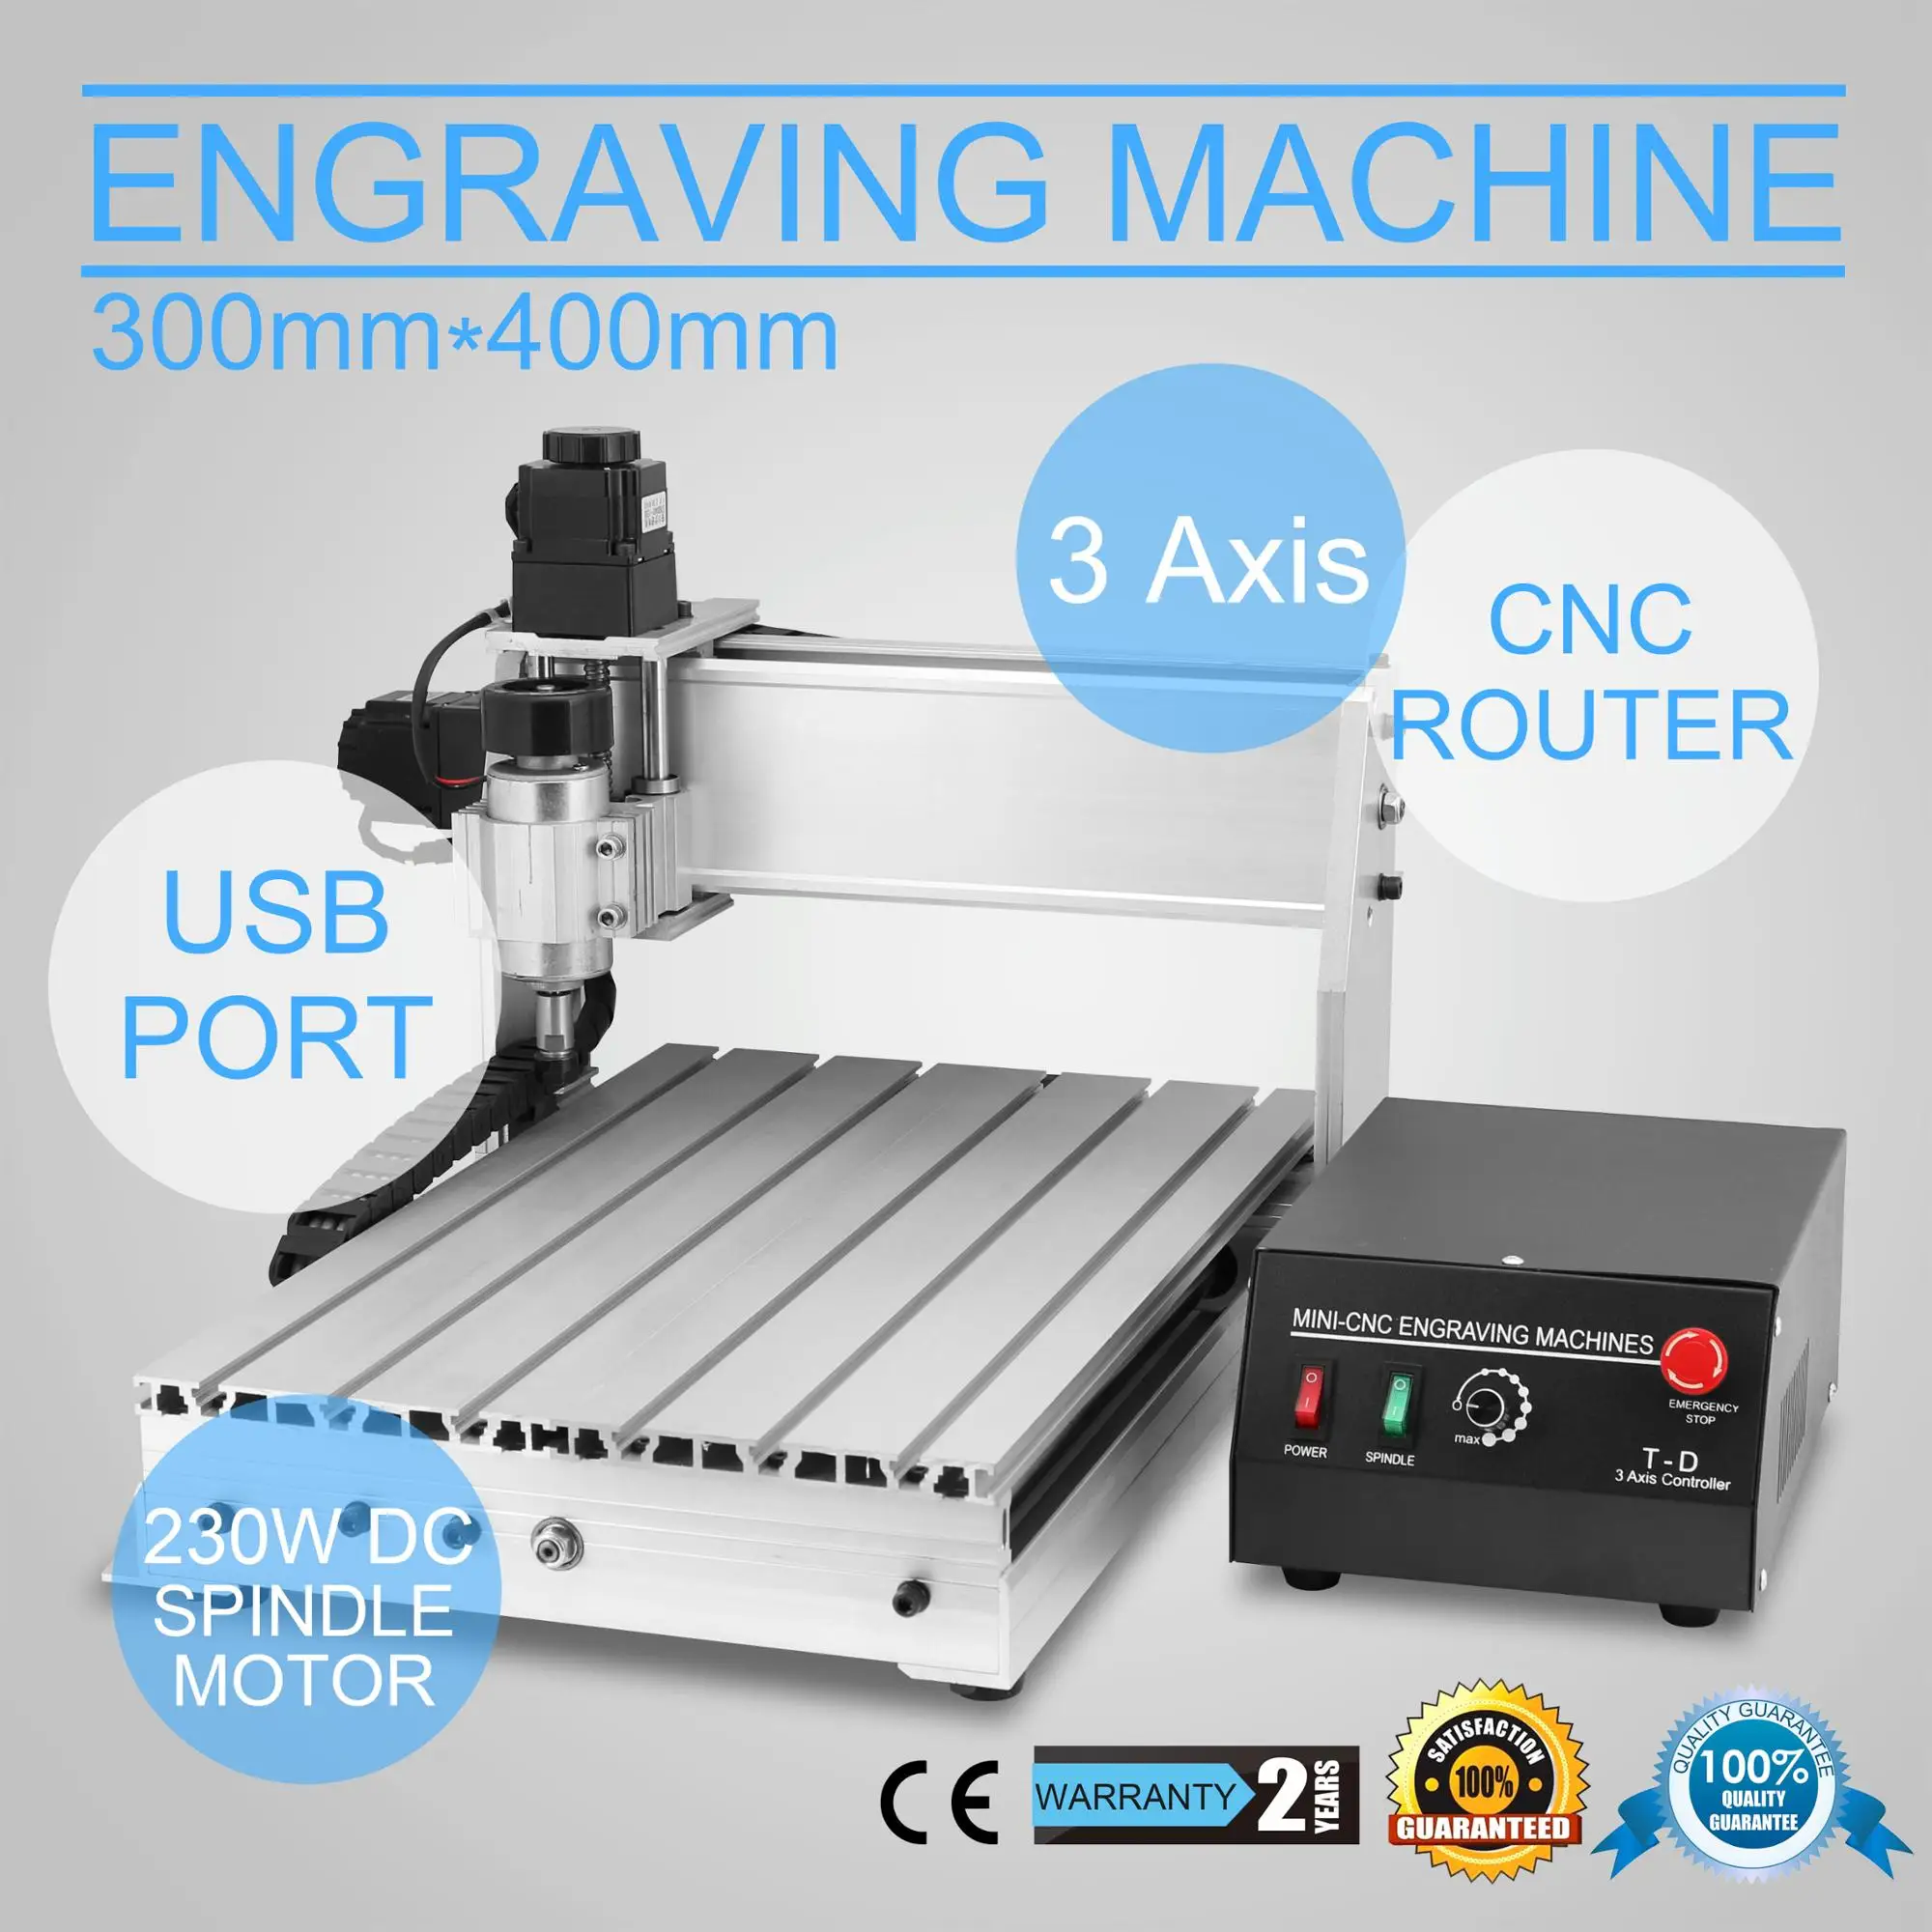 Mini 3-Axis CNC Router Engraver Carving Graviermaschine for PCB PVC Milling Wood 